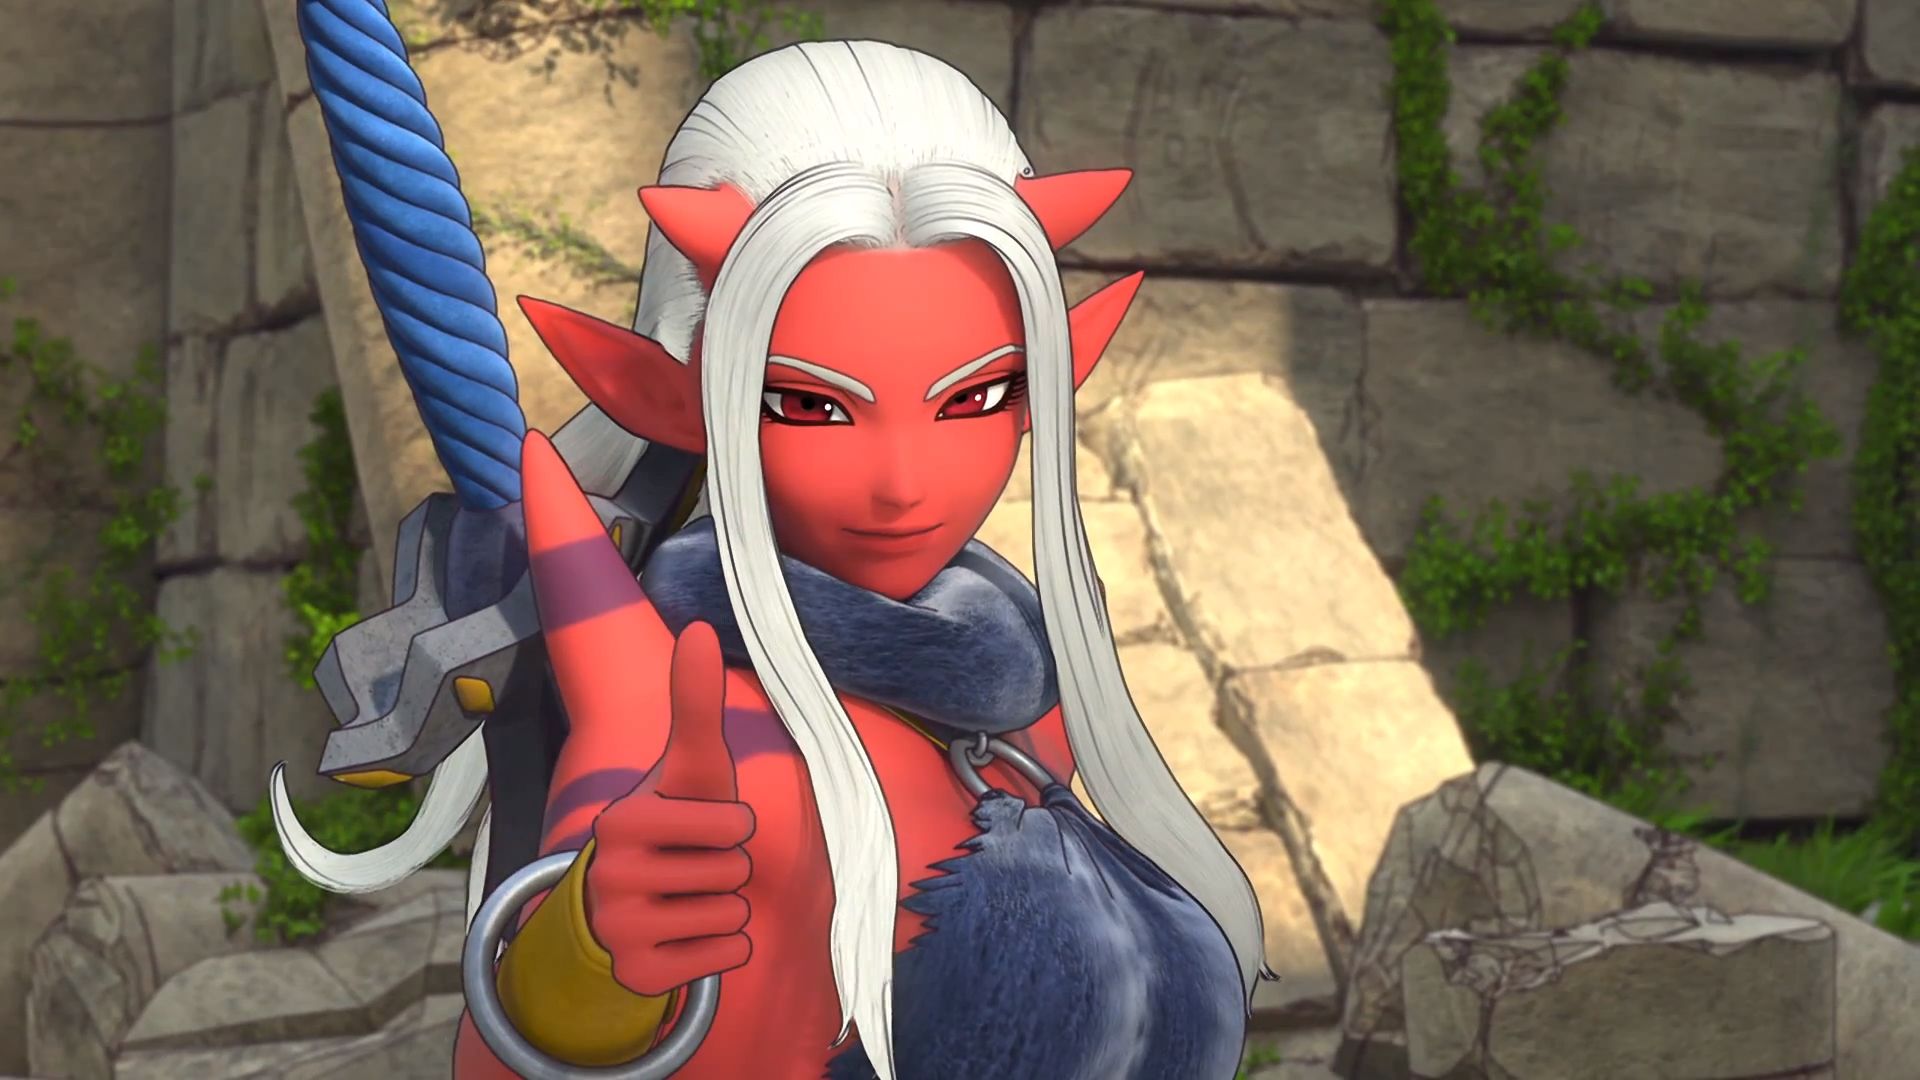 “Dragon Quest X” Announced for PS4, NX; 3DS Demo Available Now, Game News